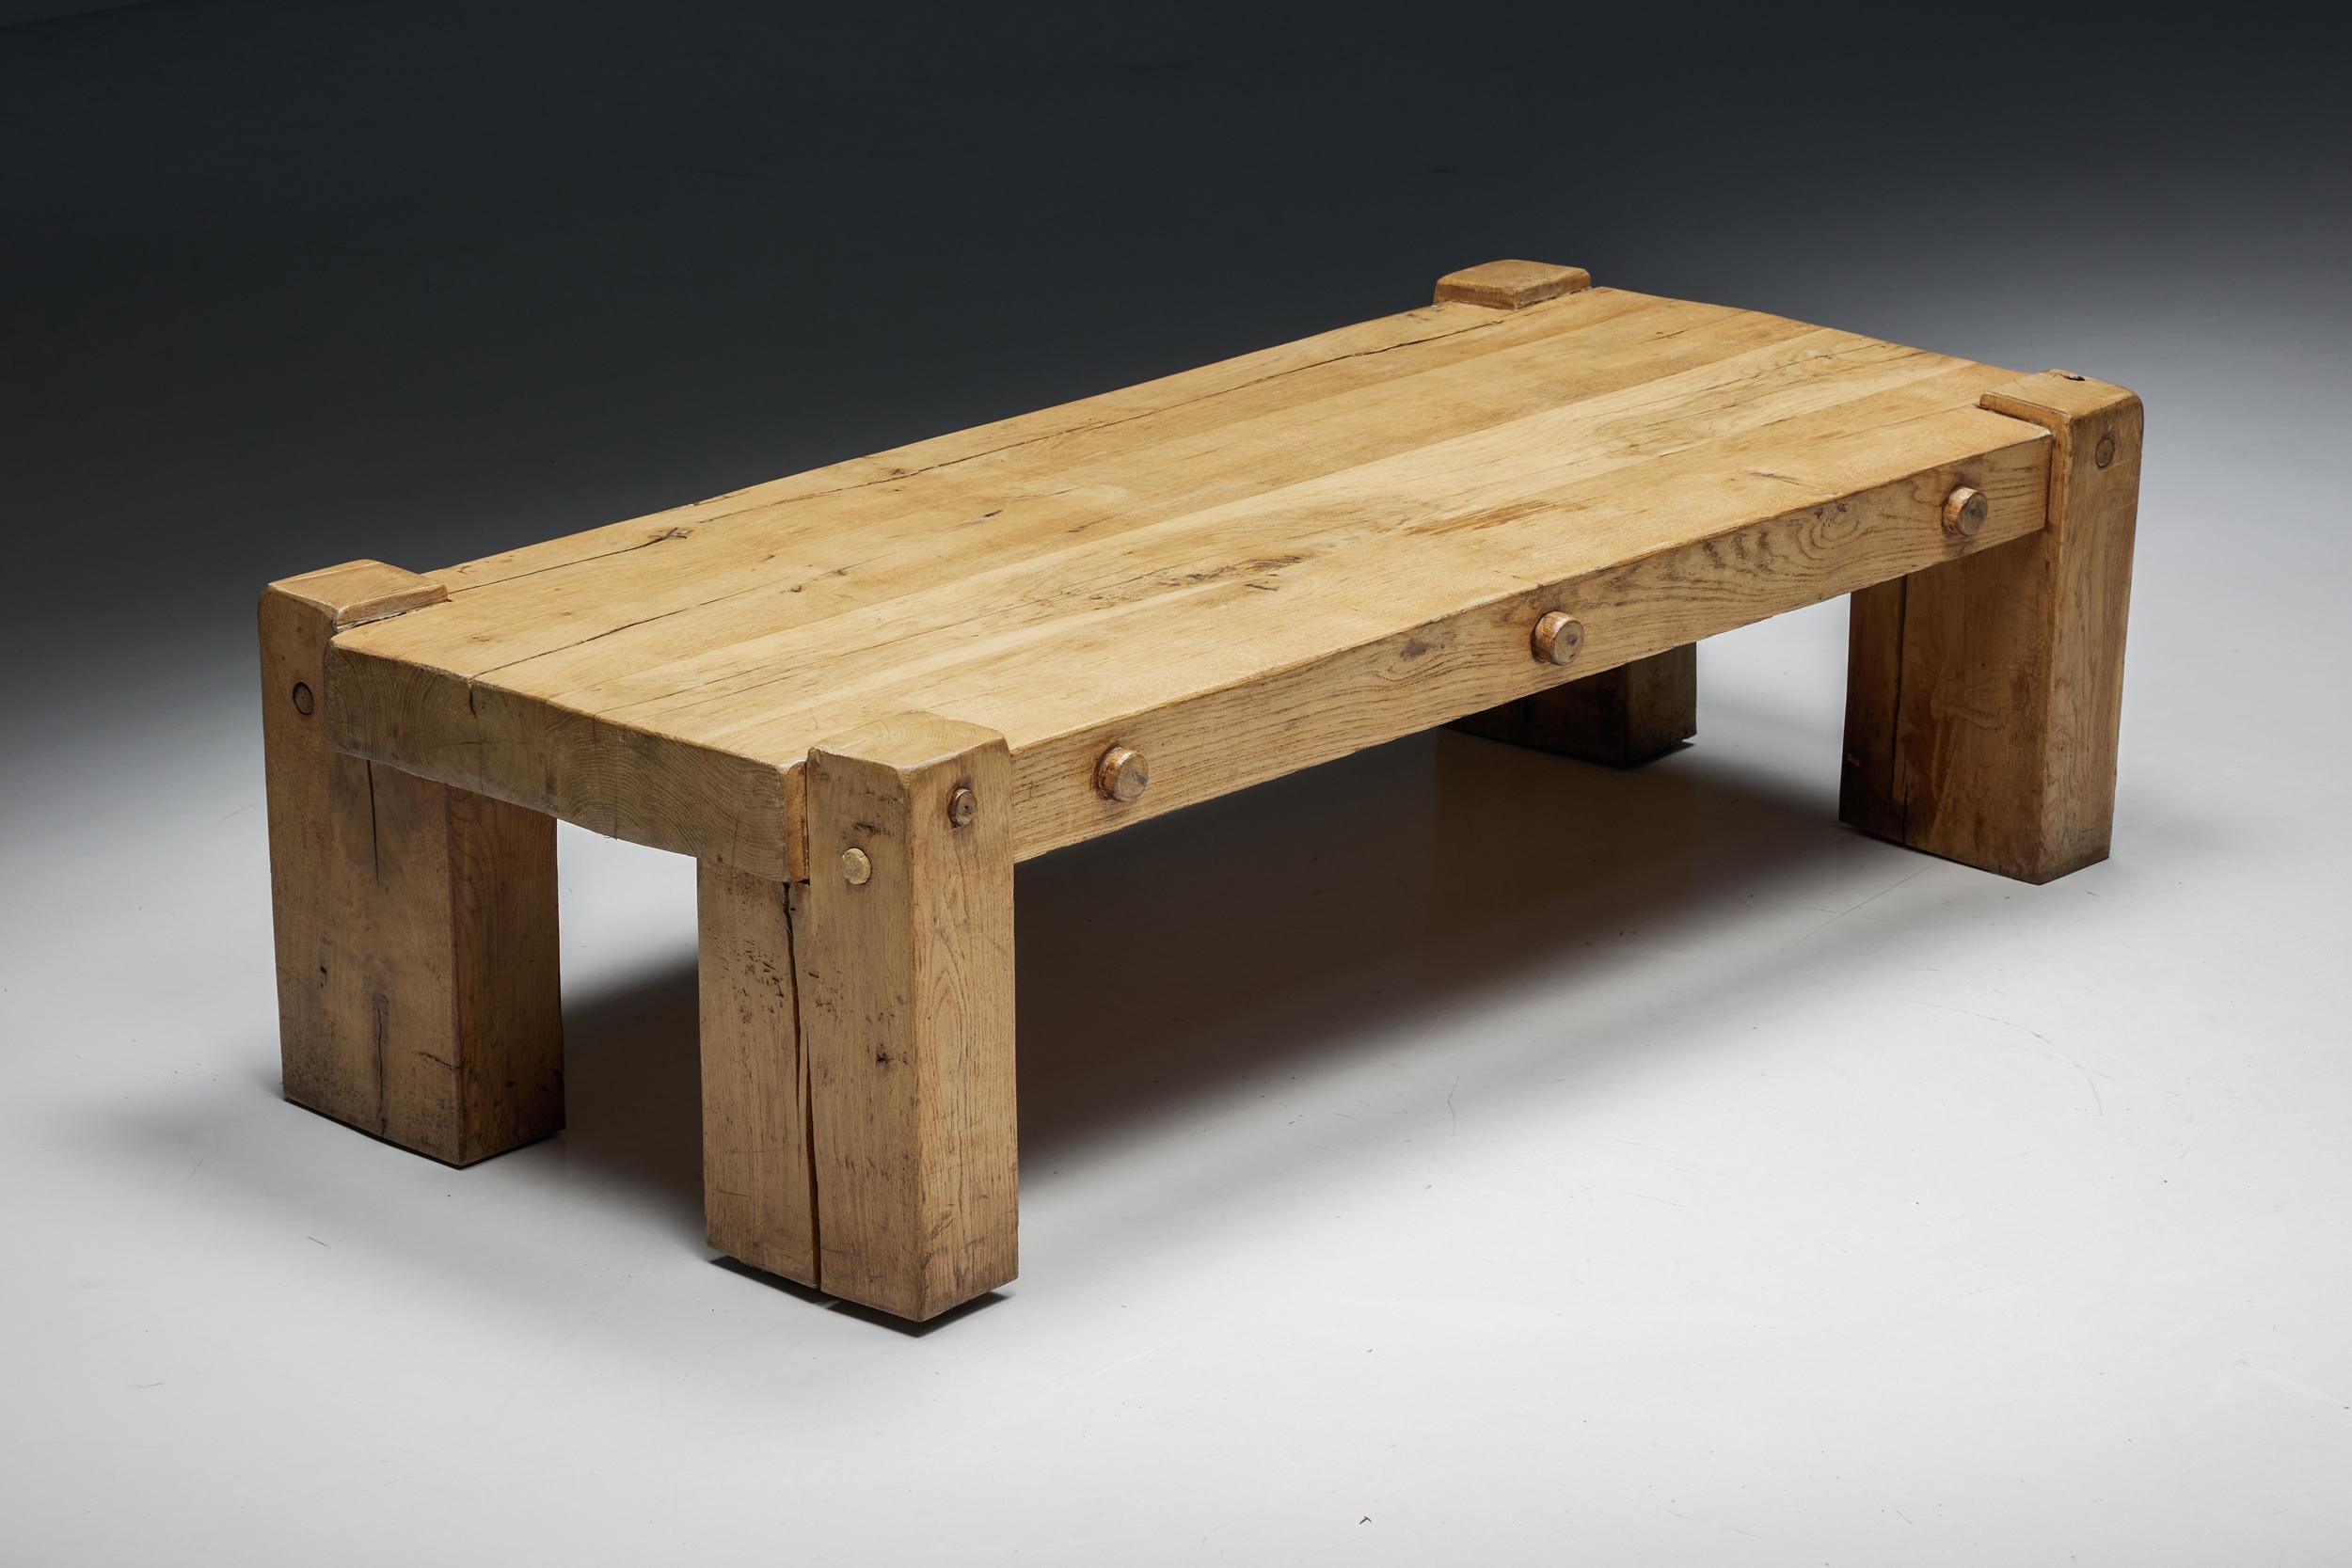 Brutalist; solid wood; coffee table; france; 1940s; rustic; wabi-sabi; coffee table; side table; wood; patina; mid-century modern; craftsmanship; robust; rustic; rural; travail brutaliste;

Rustic artisan brutalist coffee table with a four-legged